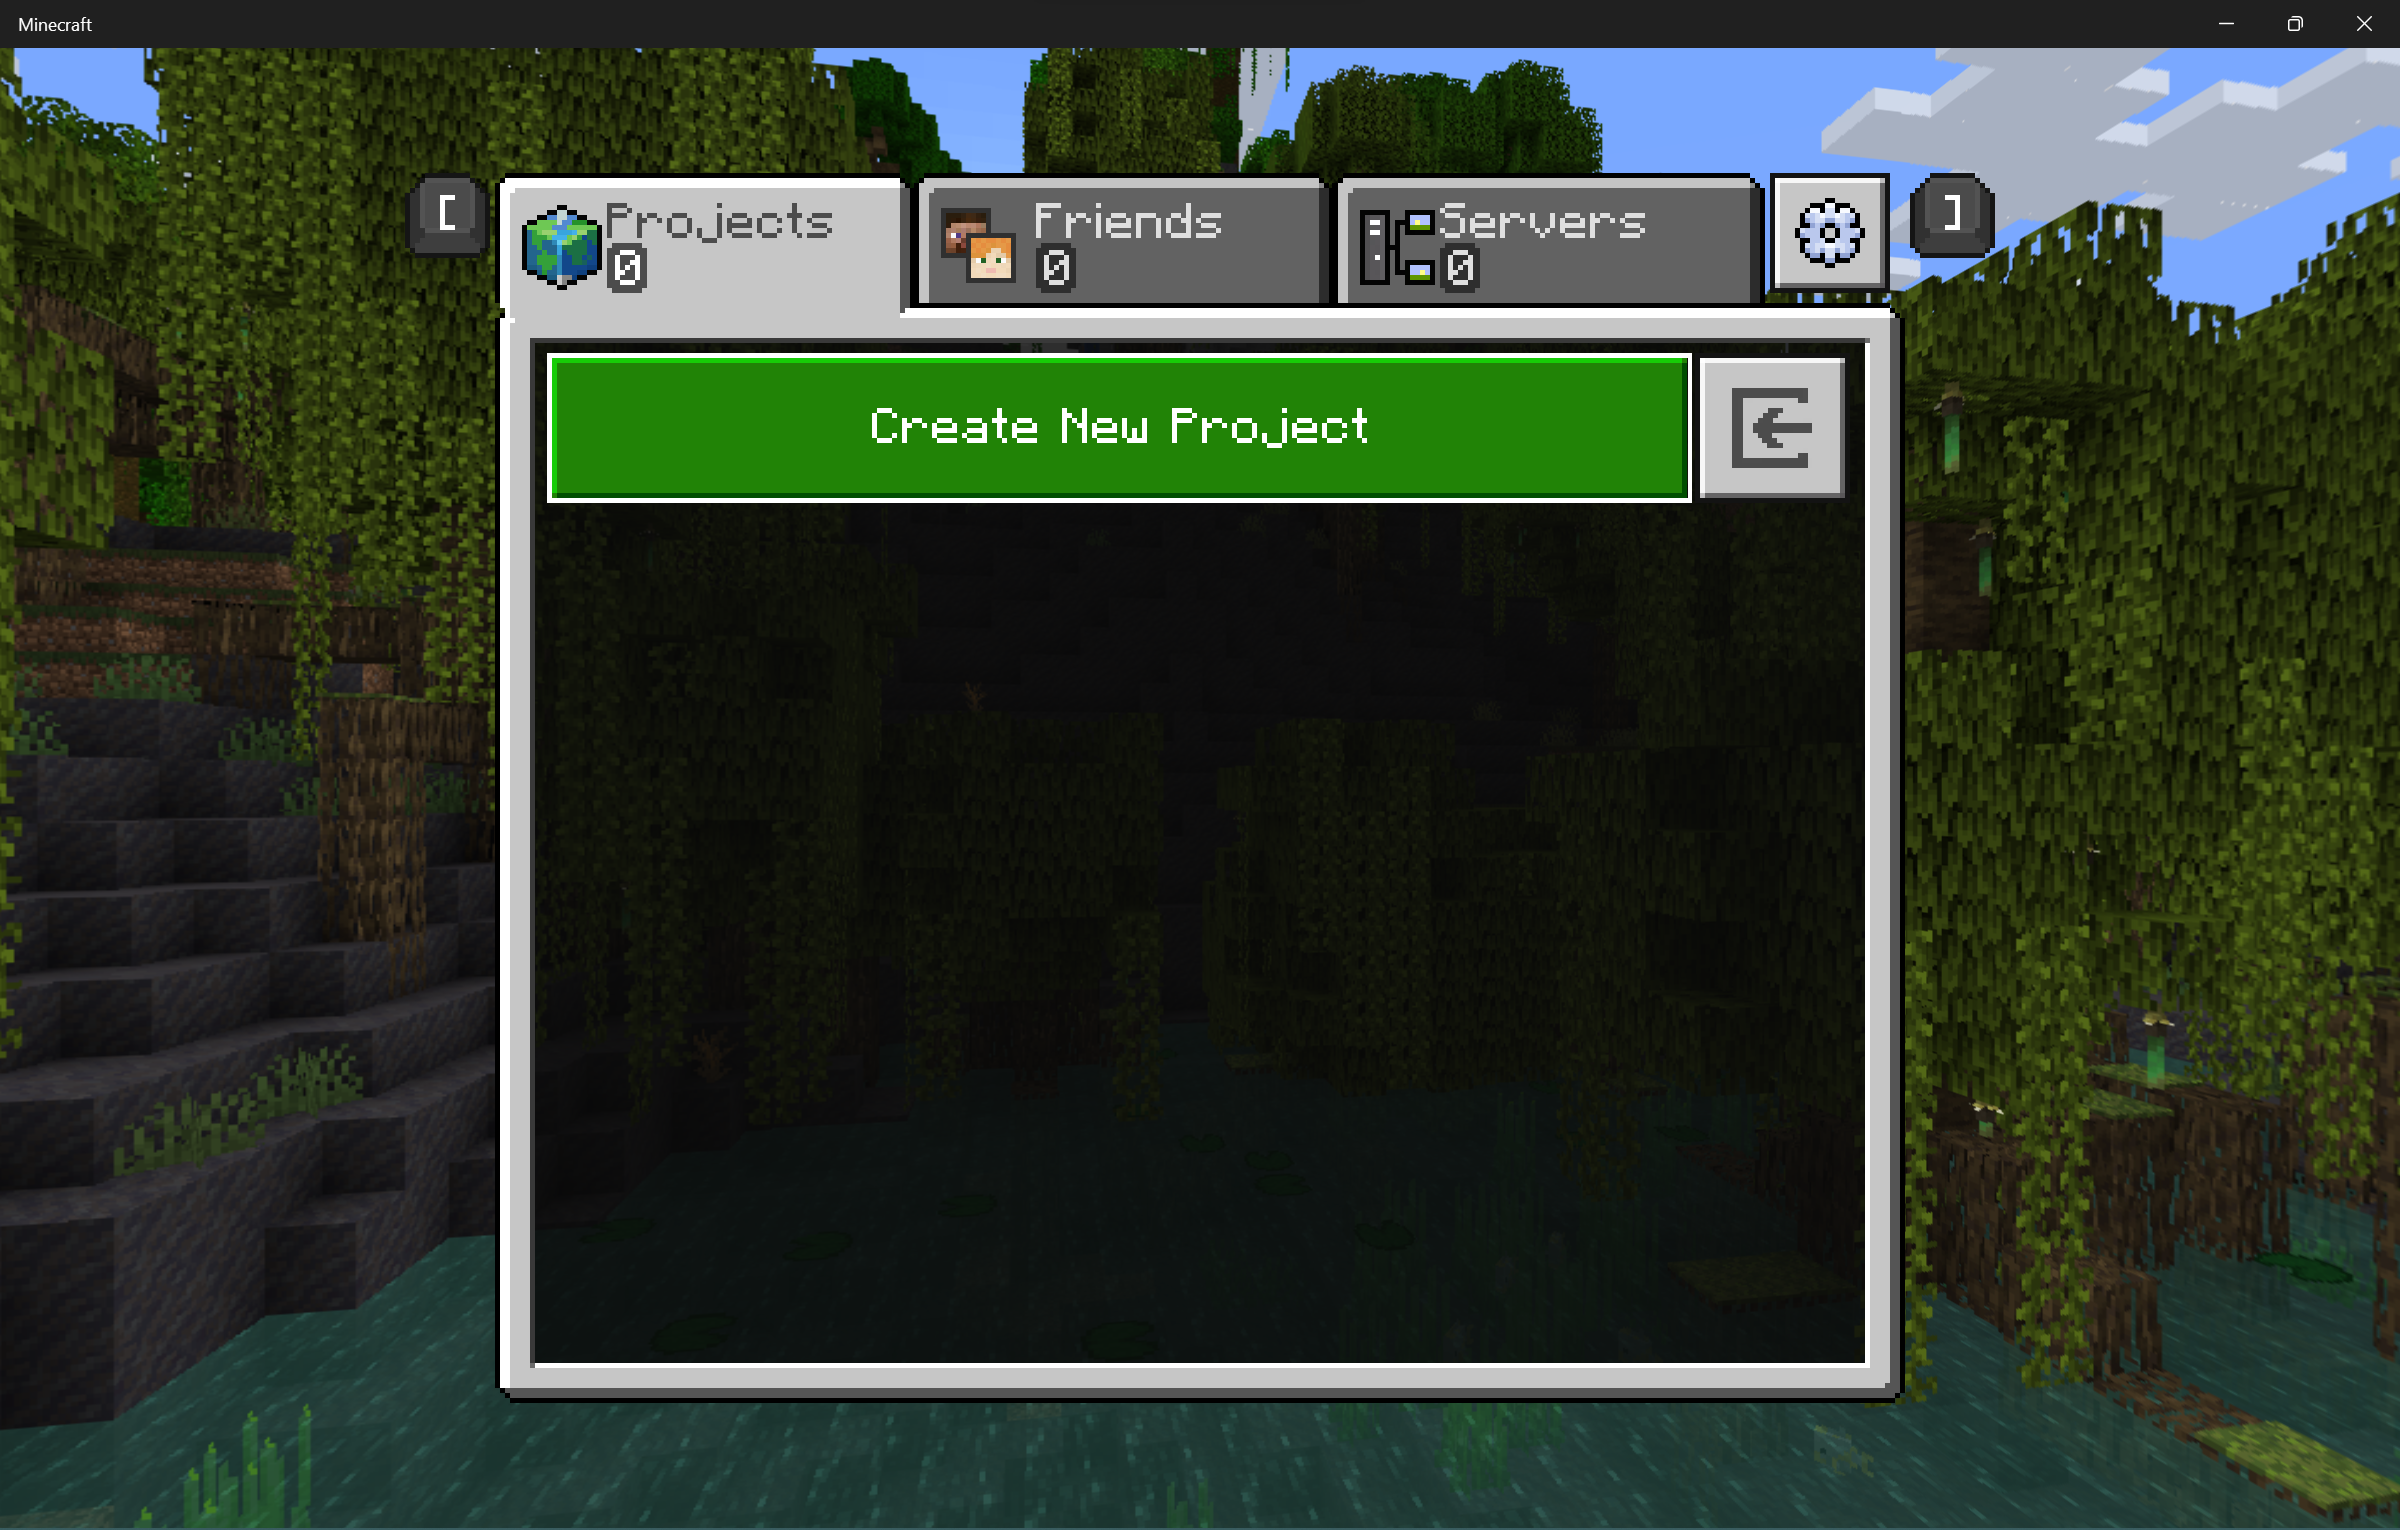 Image that shows what you should see when the Editor launches, which is the create new project screen